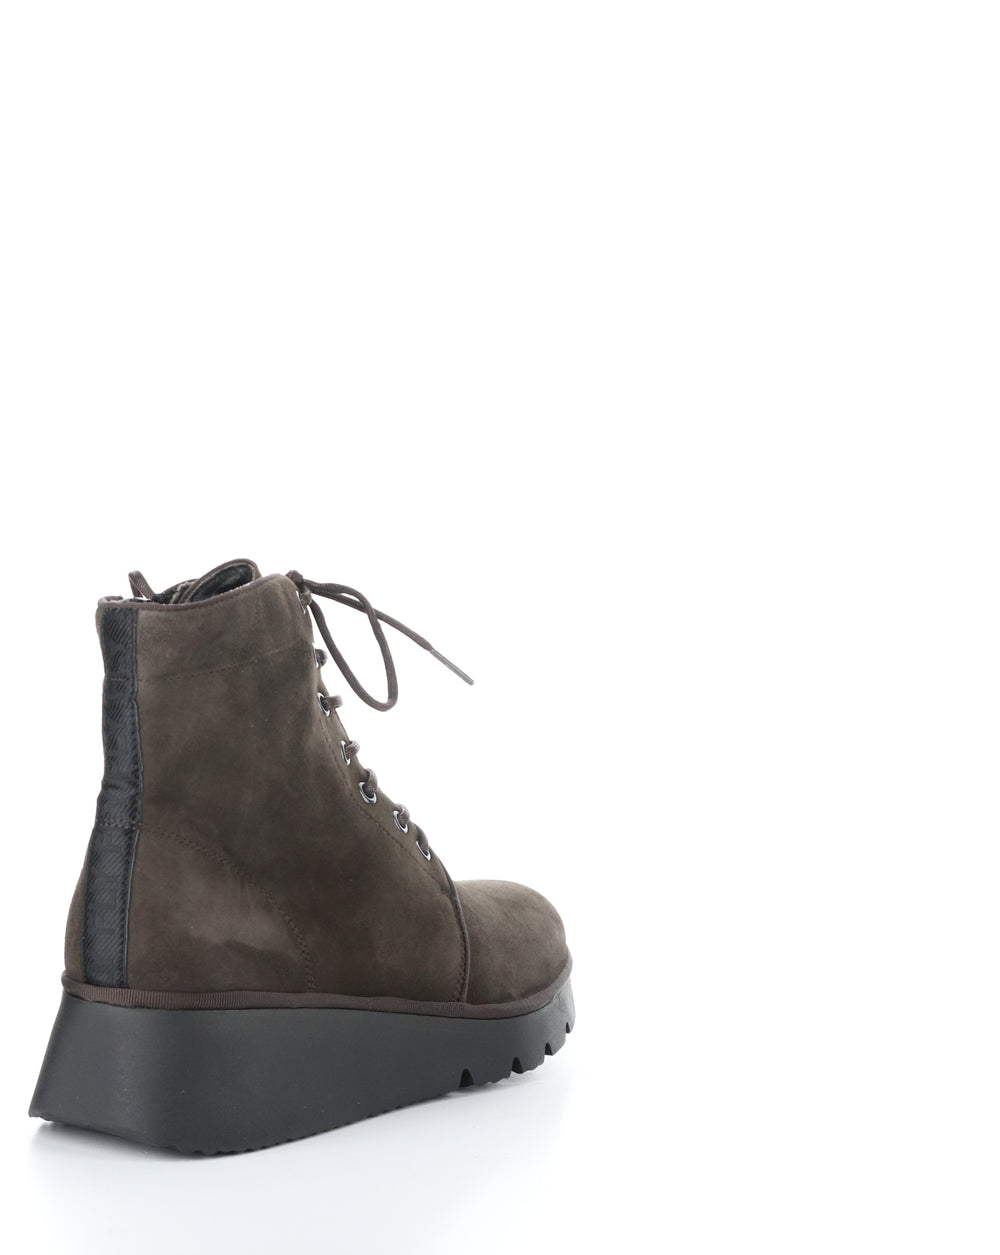 PALL404FLY 001 DK TAUPE Lace-up Boots